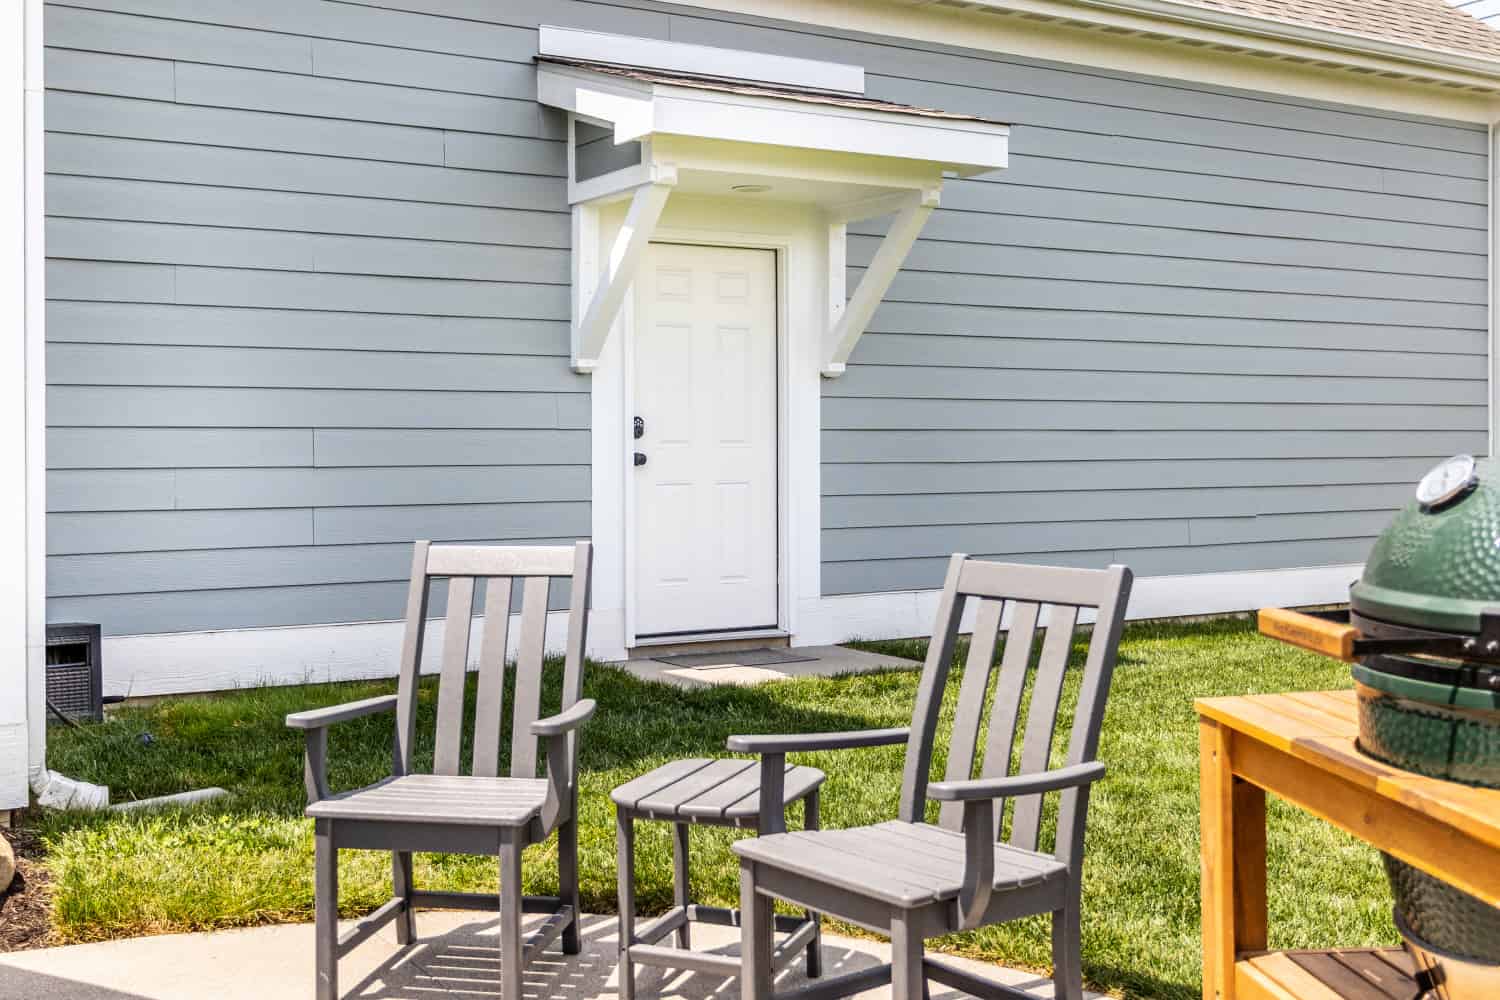 Nicholas Design Build | An outdoor grill and two chairs on a patio.